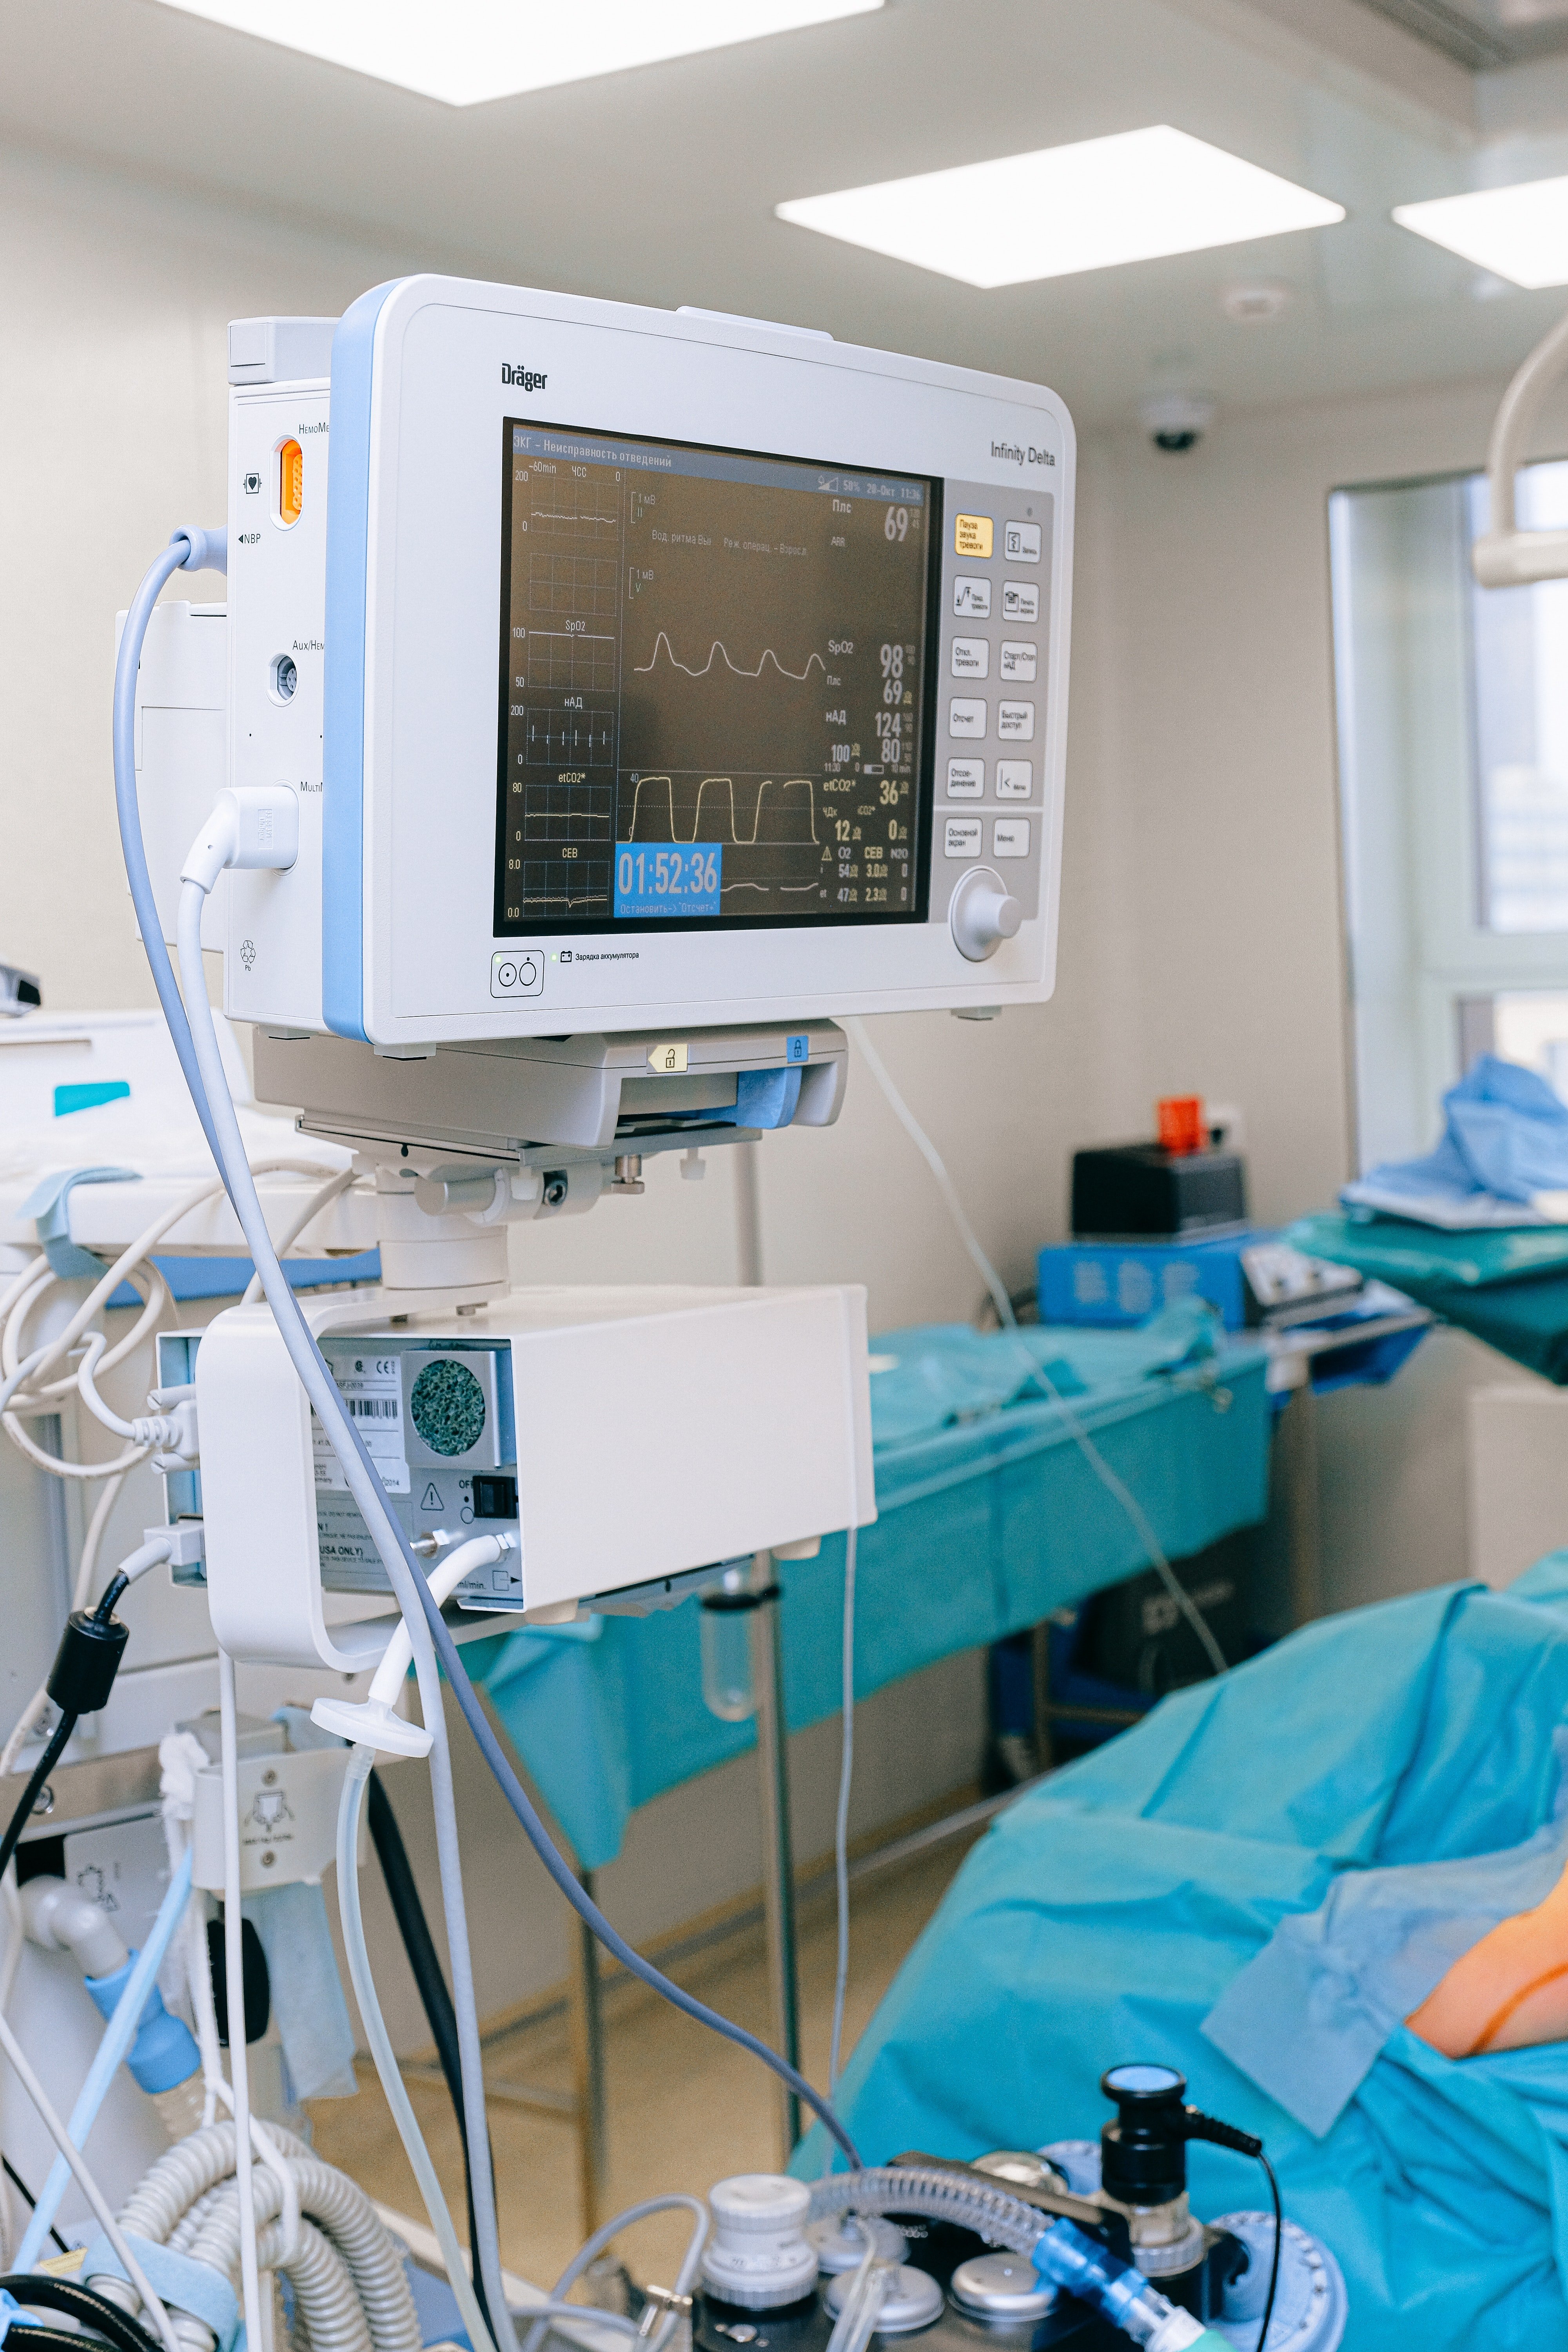 Pictured - An image of medical equipment on an operation room | Source: Pexels 